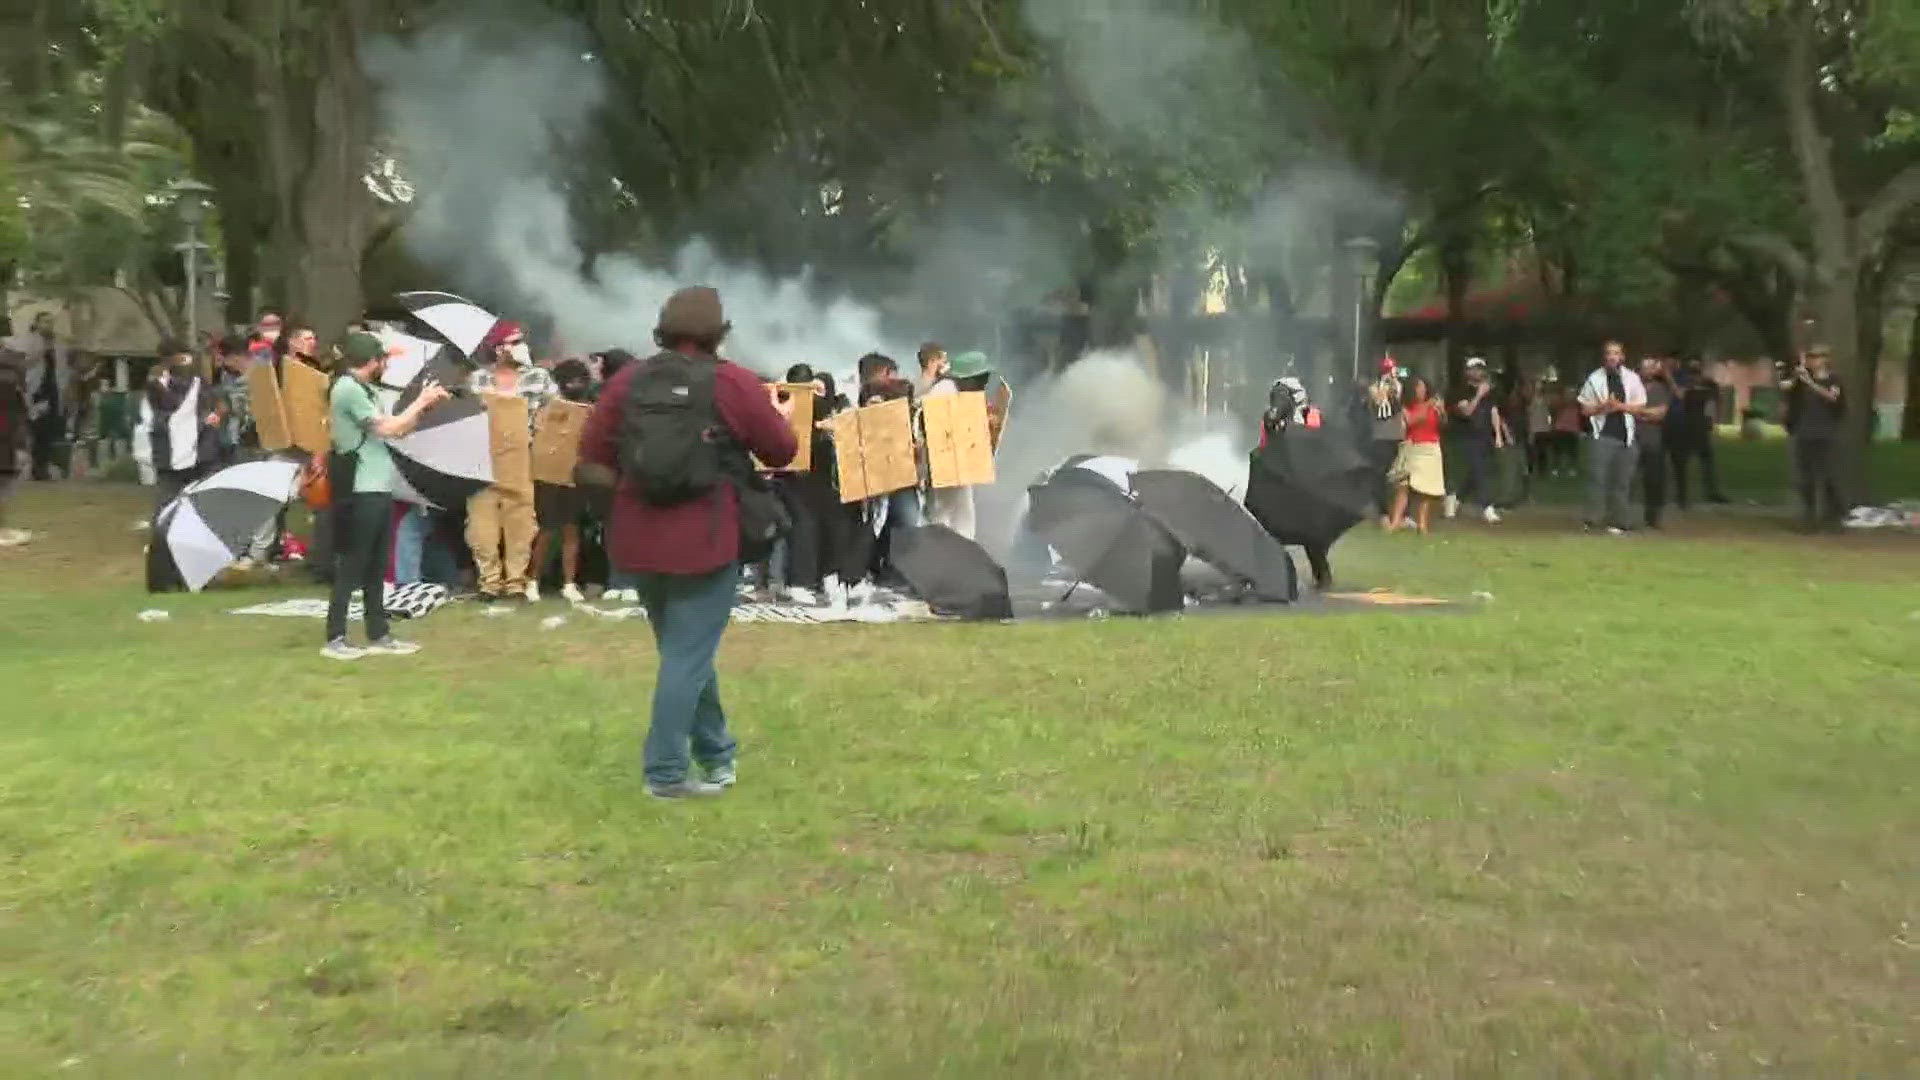 Law enforcement deployed tear gas on the group minutes after telling them to leave the area.